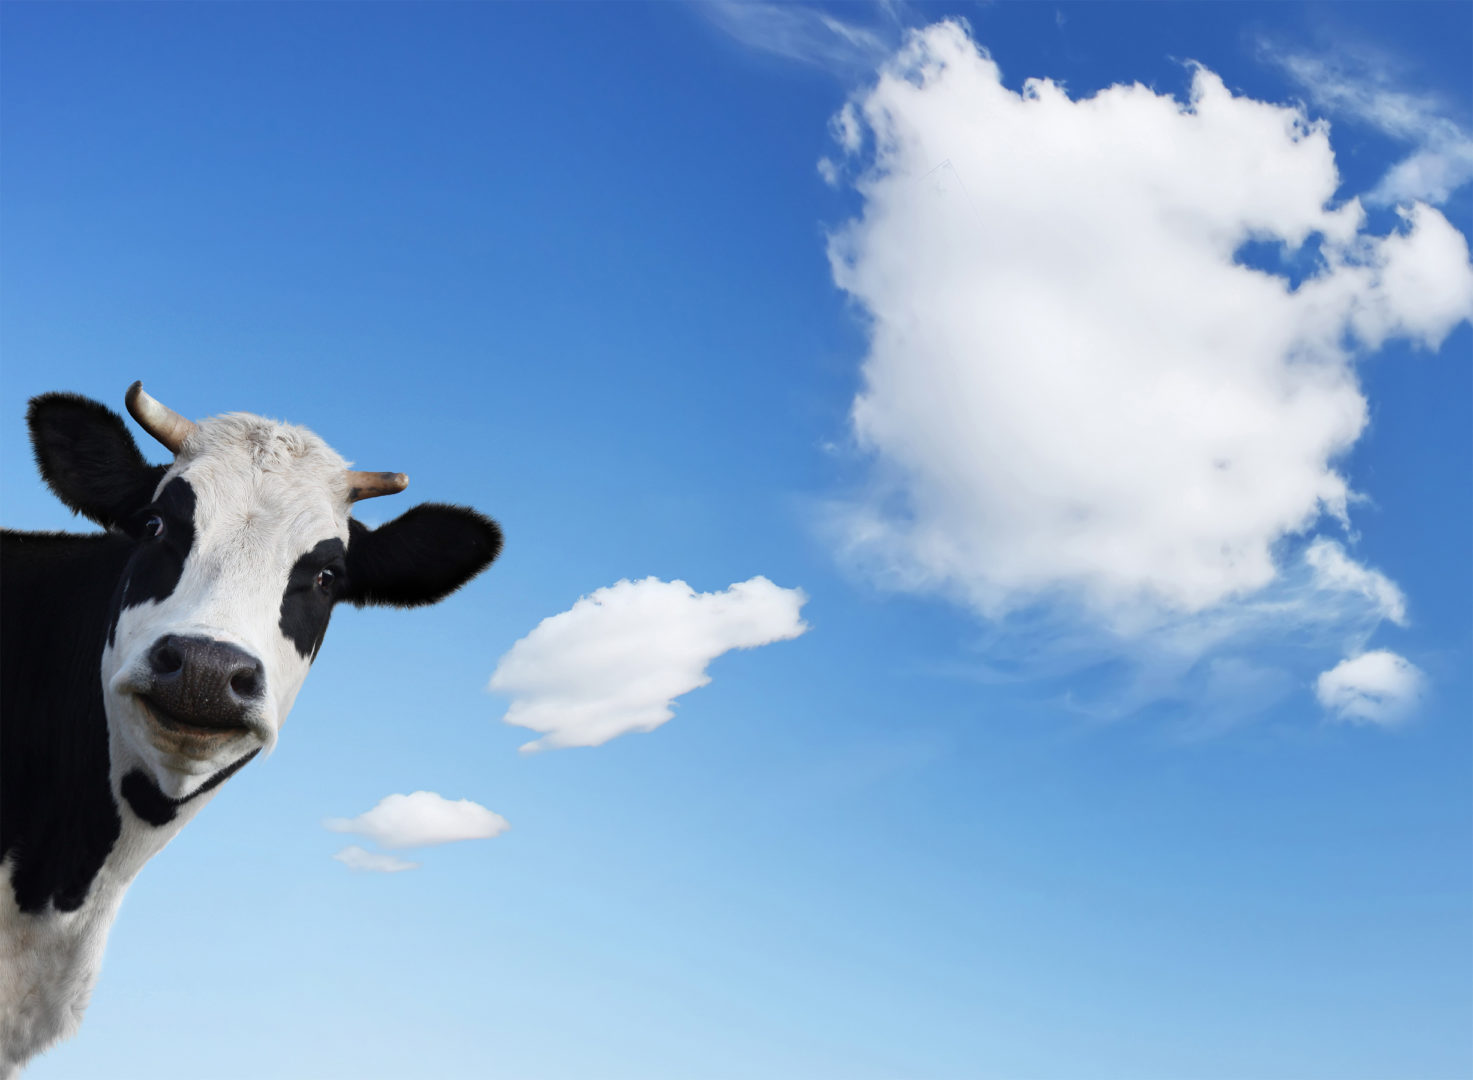 Cow peering around edge of frame with blue sky and clouds in shape of a comic book thought bubble.